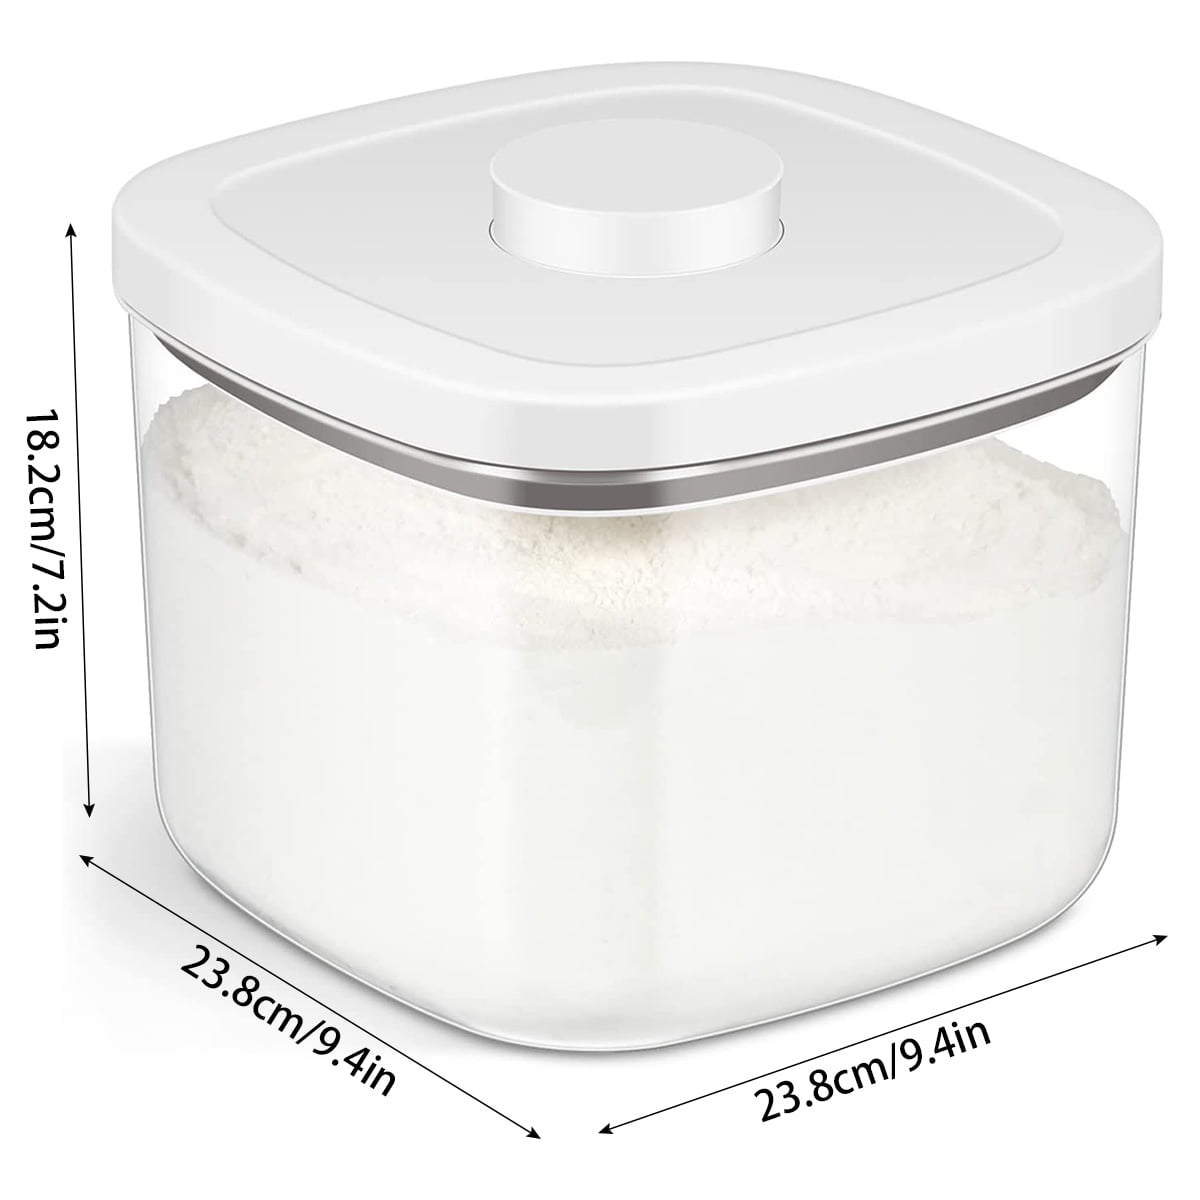 Flour Box Icing Storage Container Set of 5 – The Flour Box